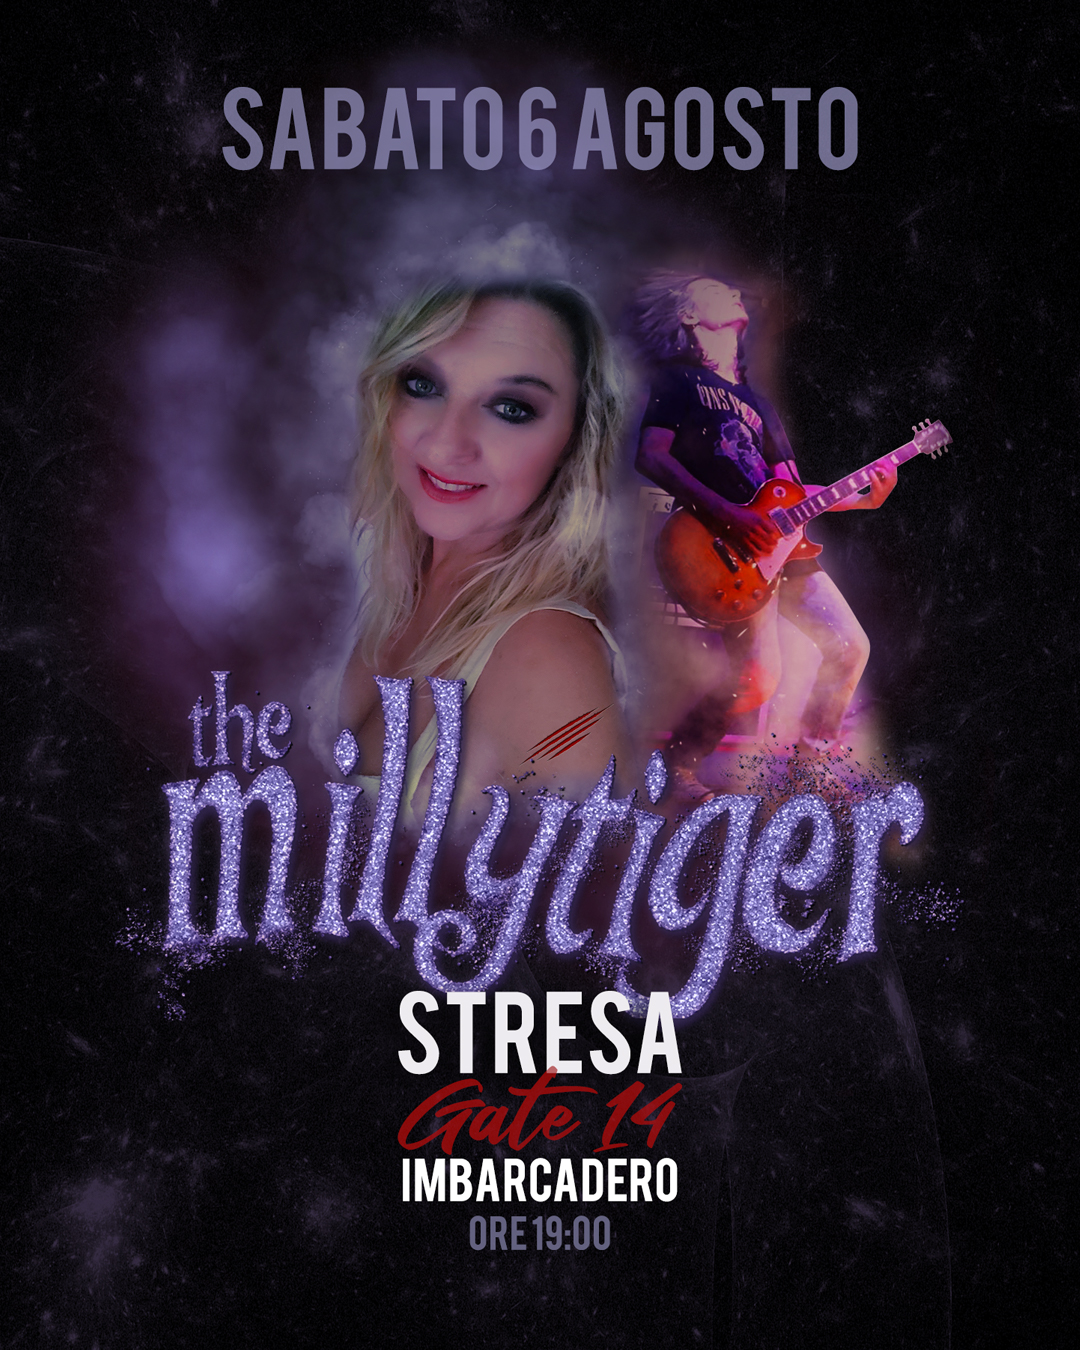 The millytiger 06-08-2022